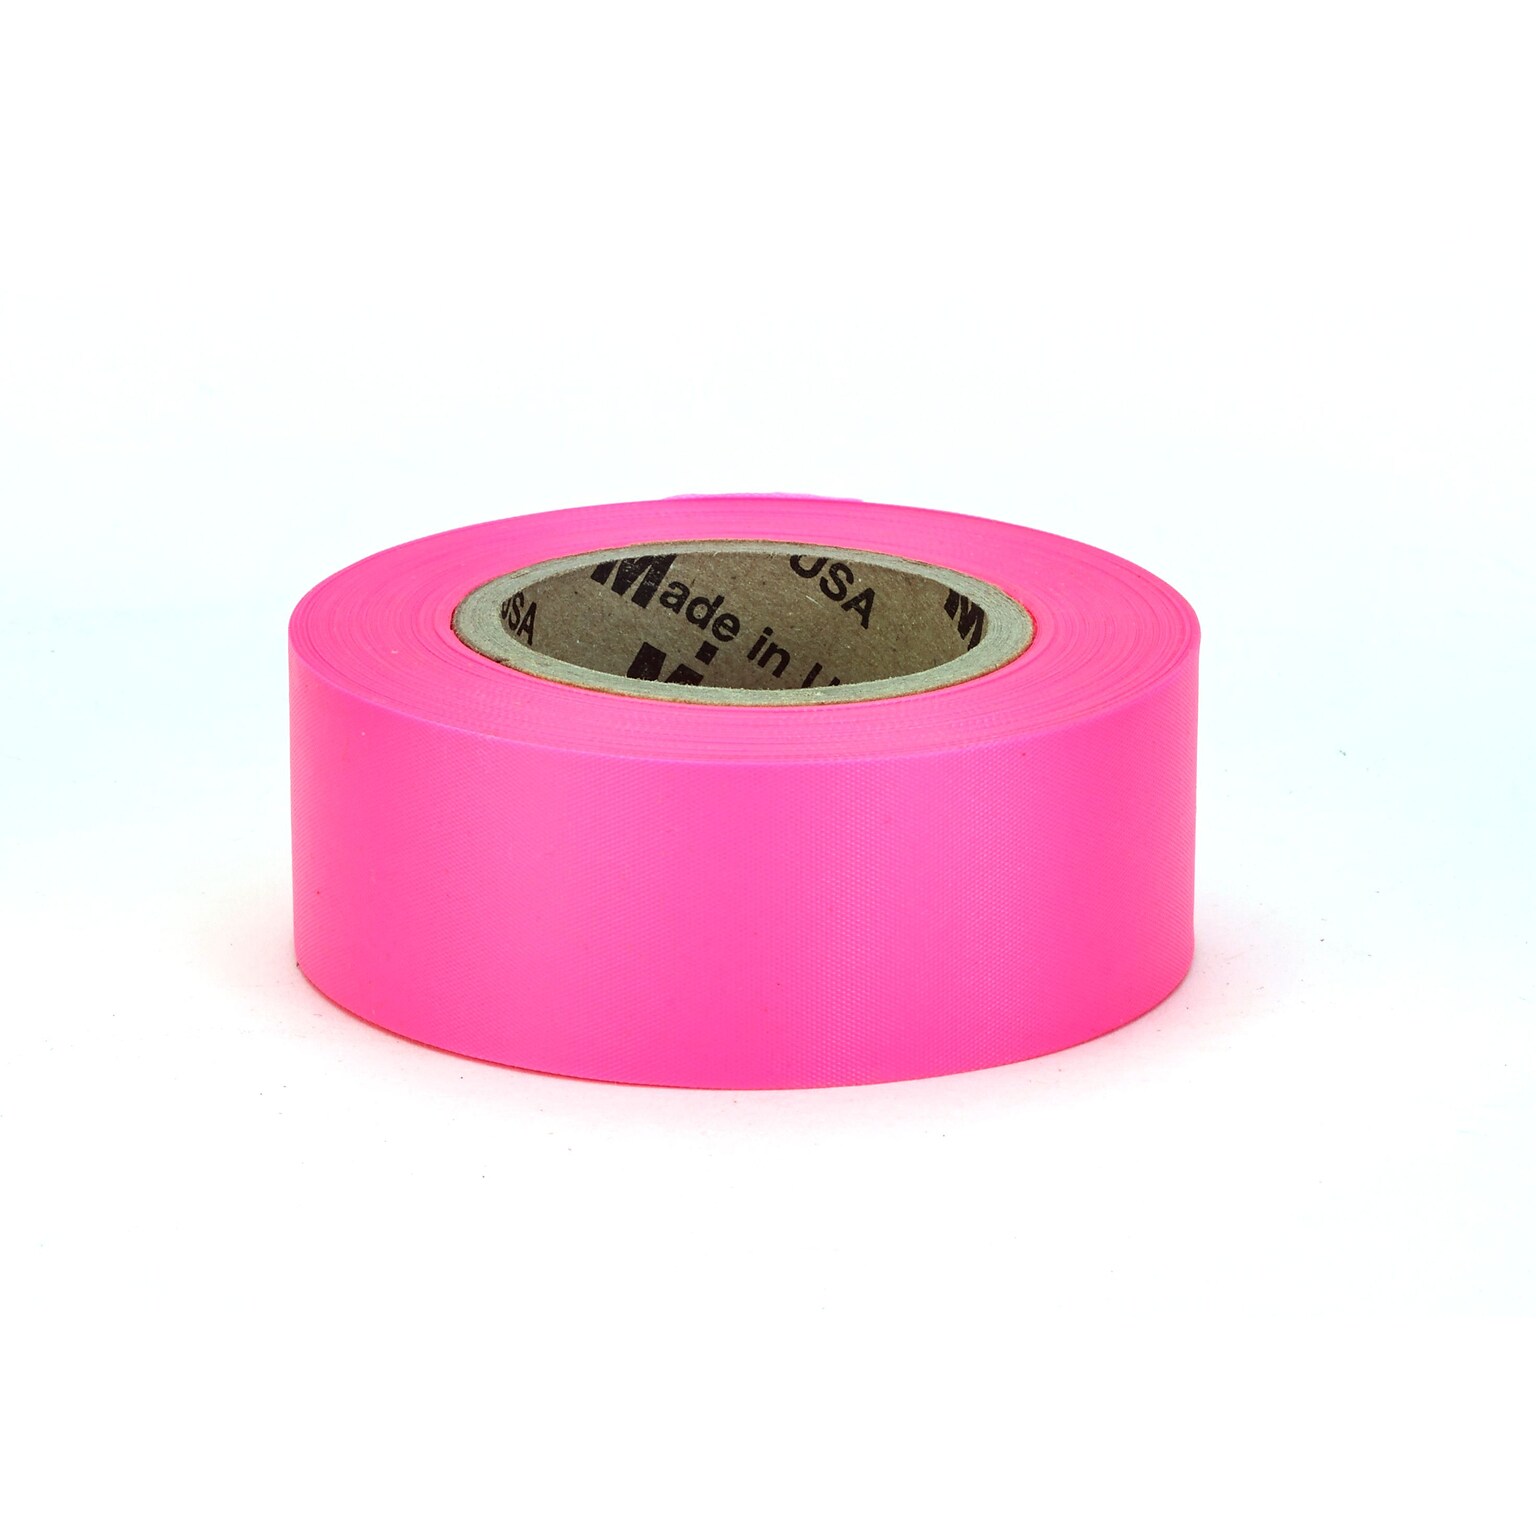 Mutual Industries Ultra Glo Flagging Tape, 1-3/16 x 100 yds, Pink, 12/Box (16001-175-1875)